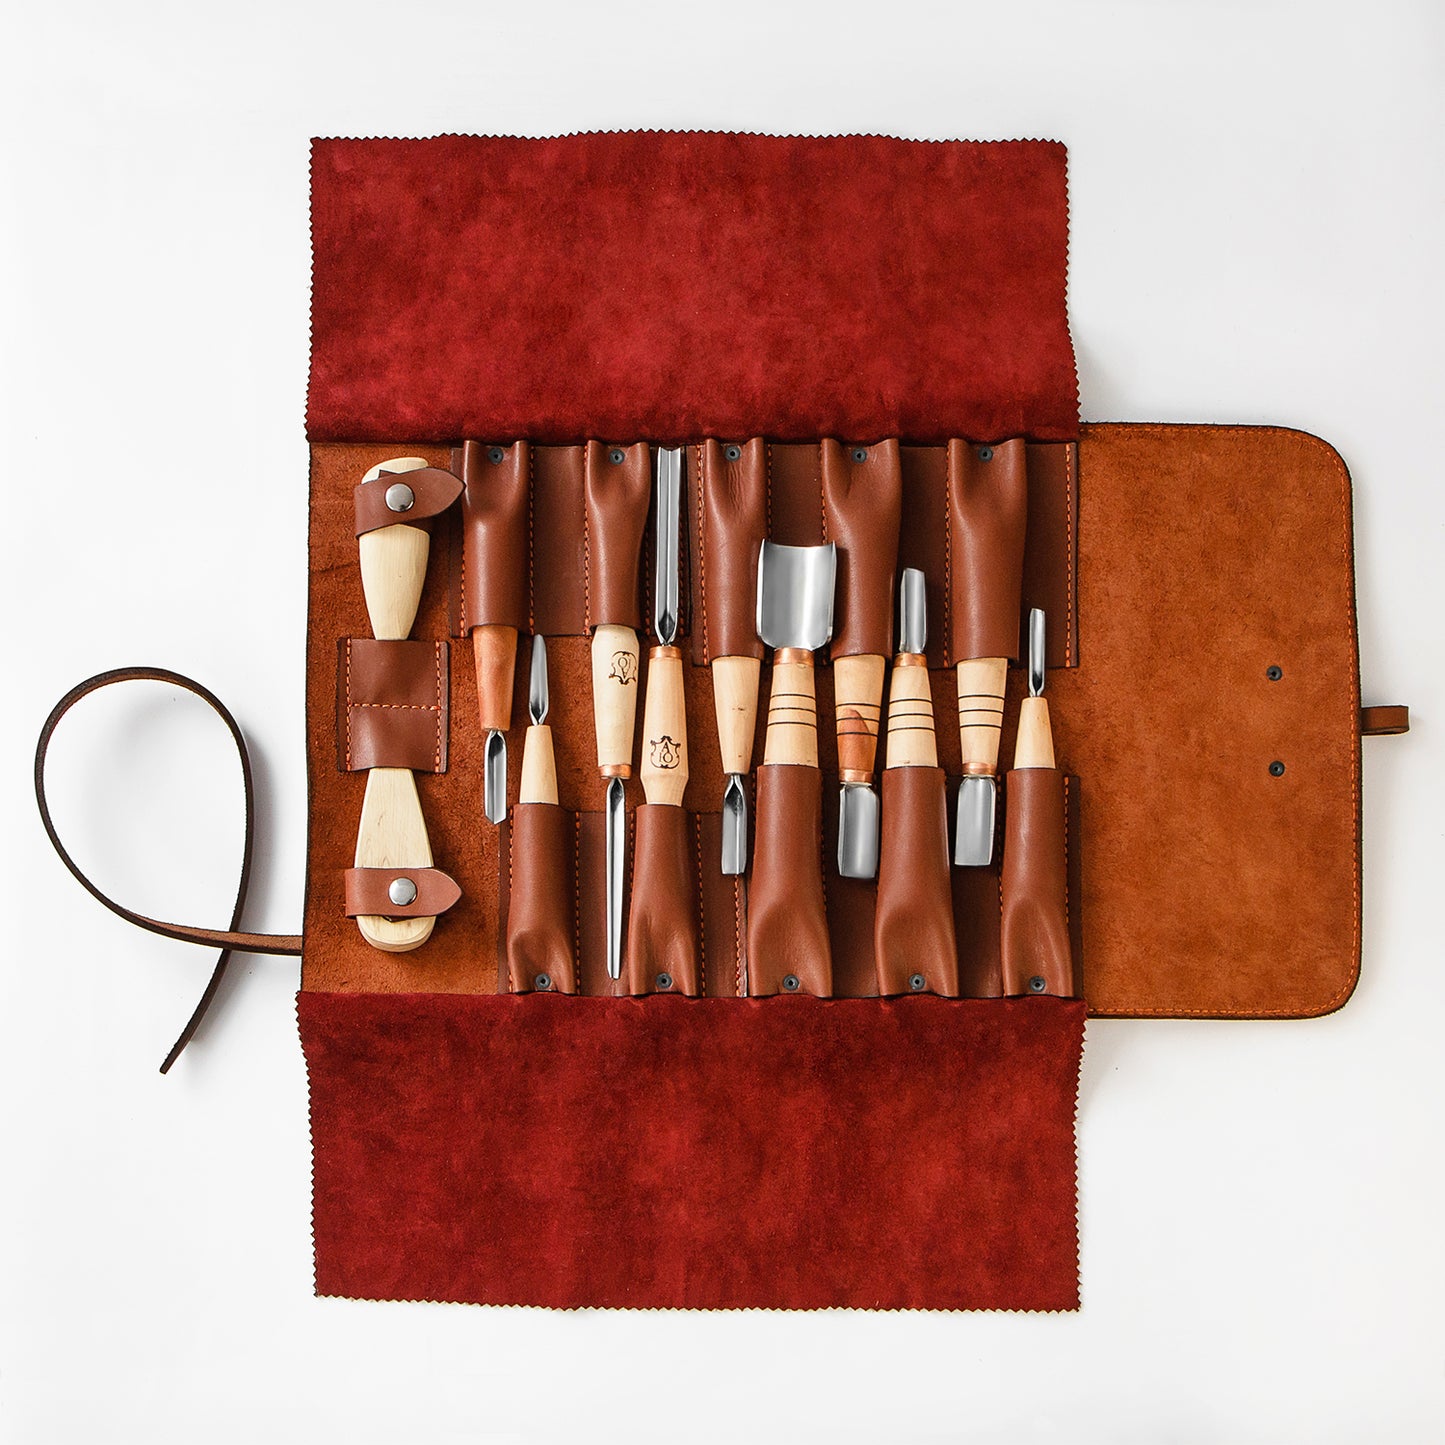 Chip carving kit for modern chip carving in a genuine leather roll-case, Basic carving set